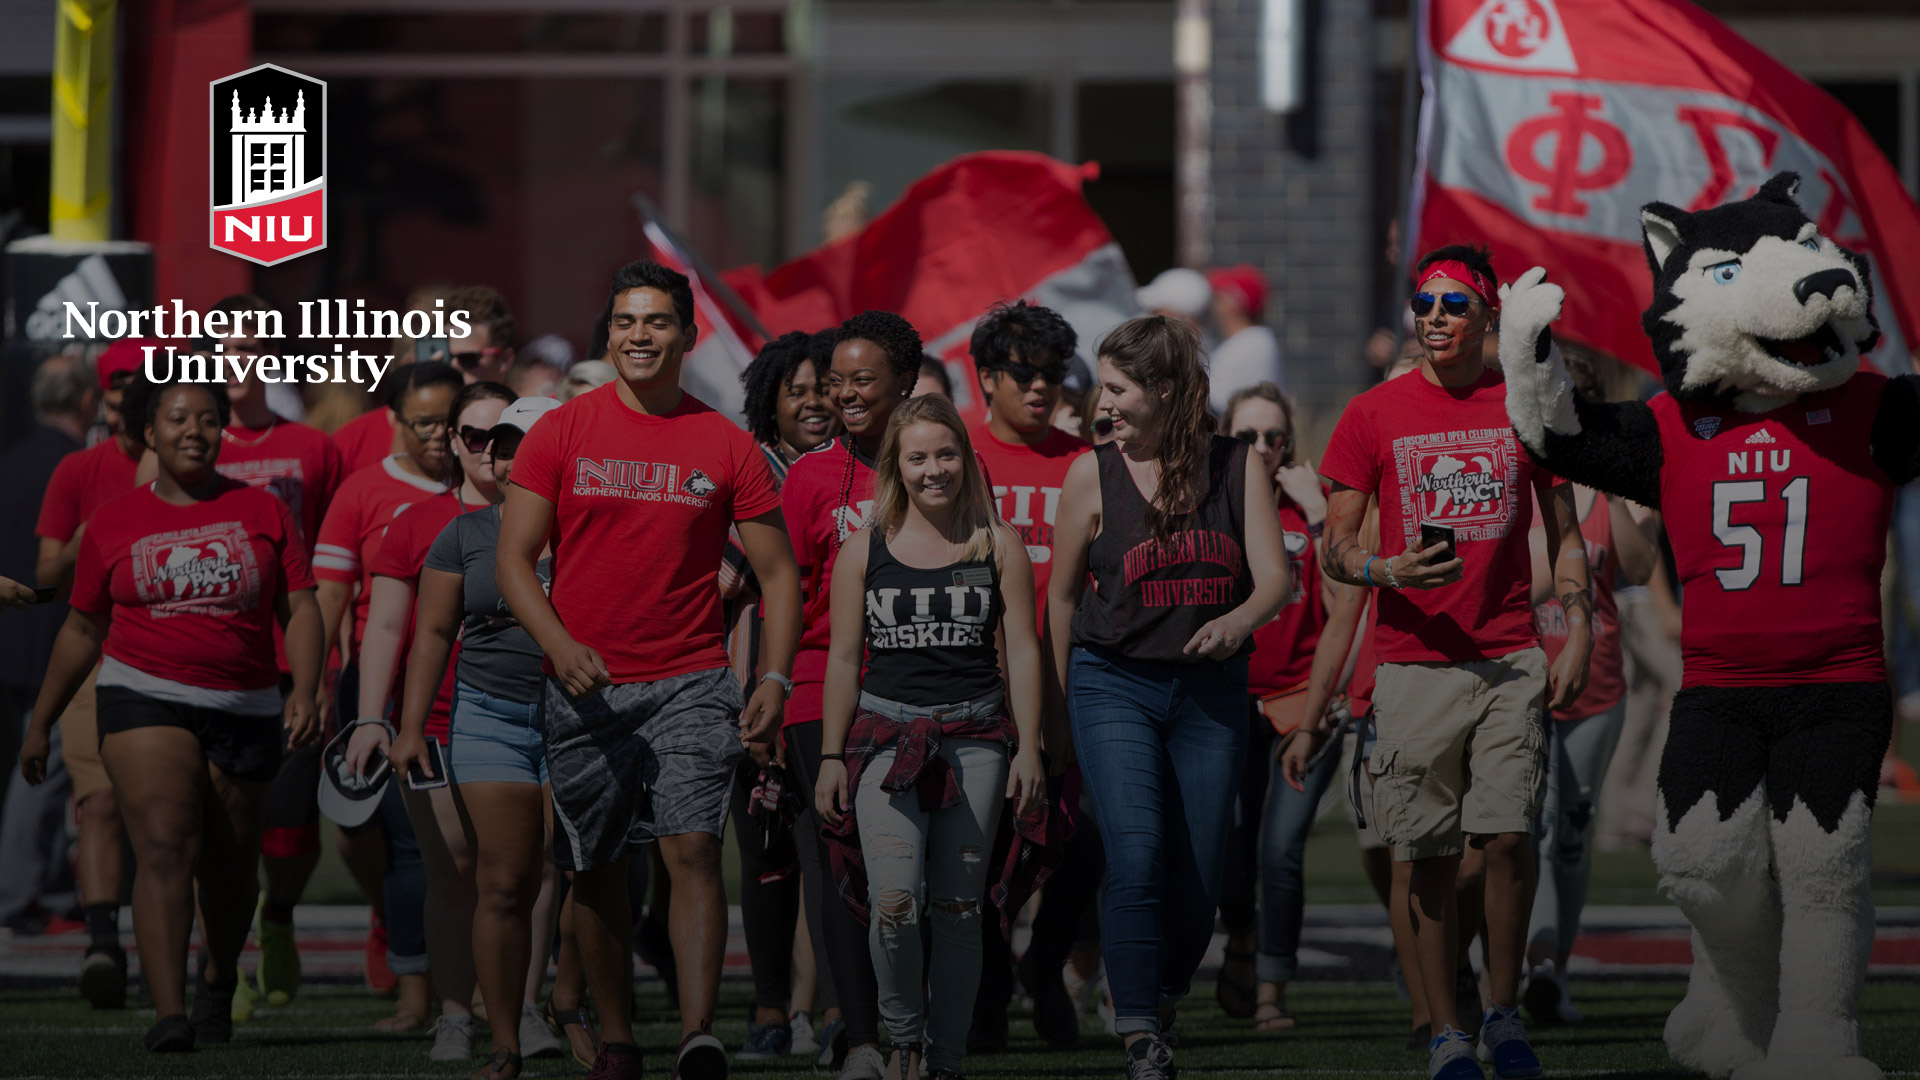 Zoom background - students in NIU gear with Victor E. Huskie